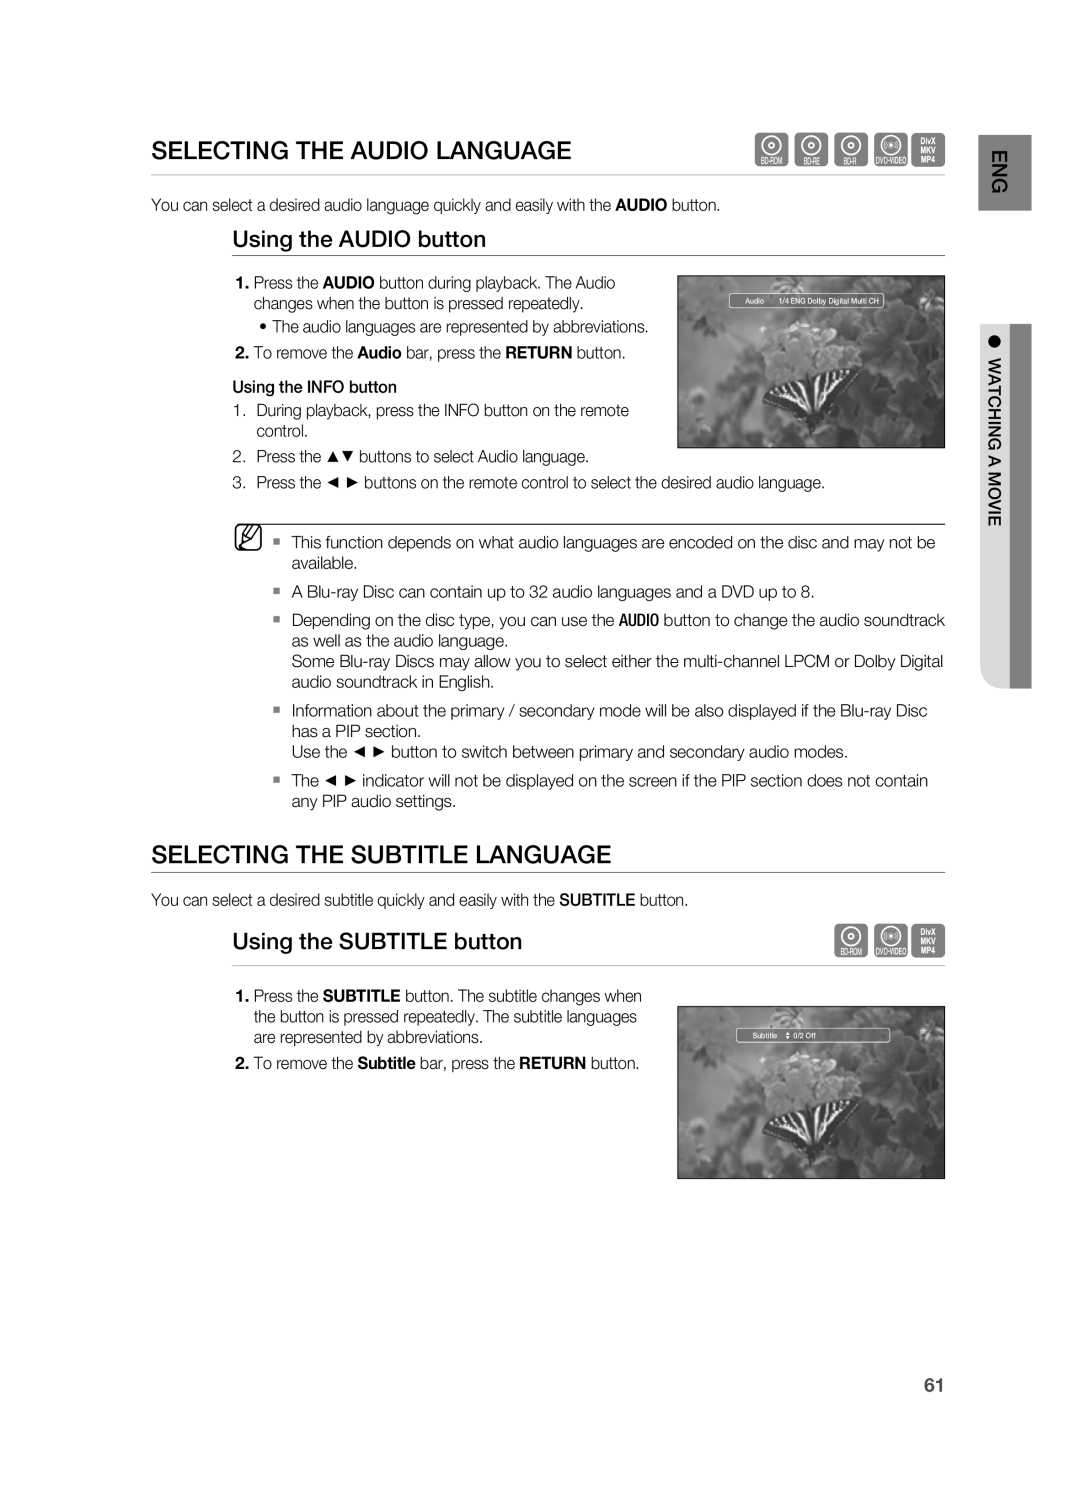 Samsung HT-BD8200 user manual hgfZ, Selecting The Audio Language, Selecting The Subtitle Language, Using the AUDIO button 